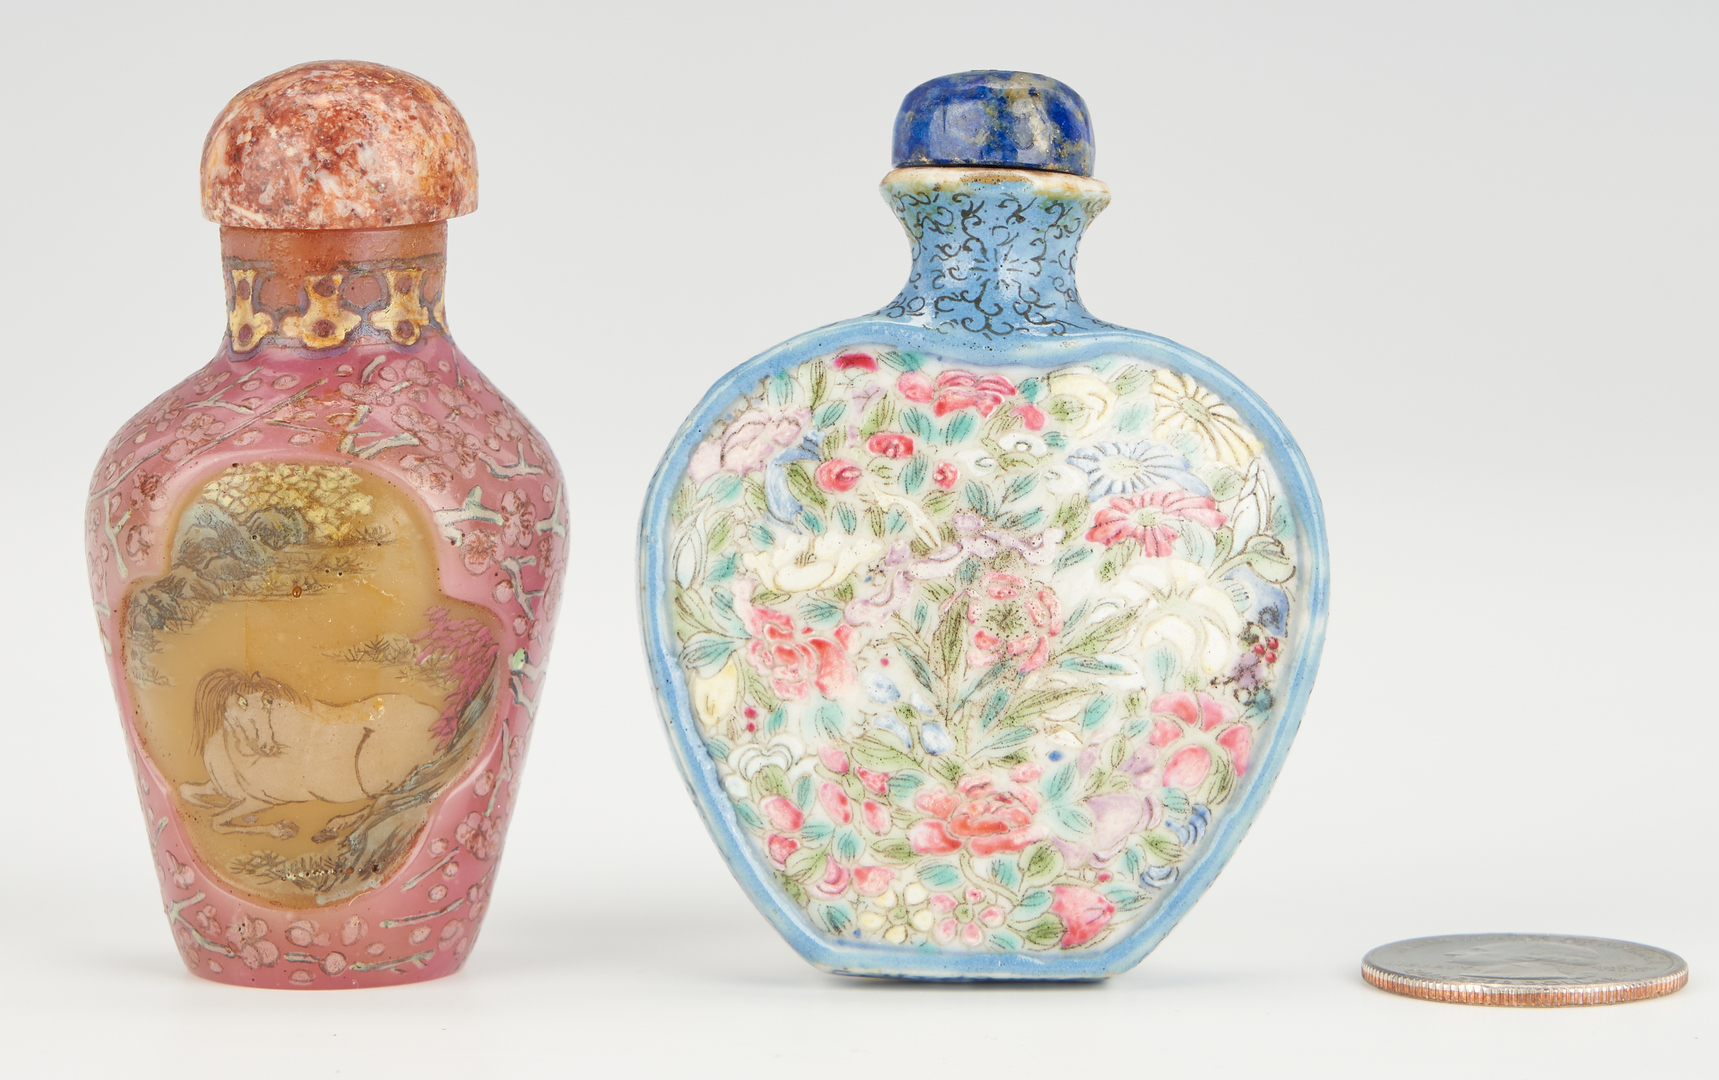 Lot 18: 2 Chinese Snuff Bottles, Porcelain and Peking Glass